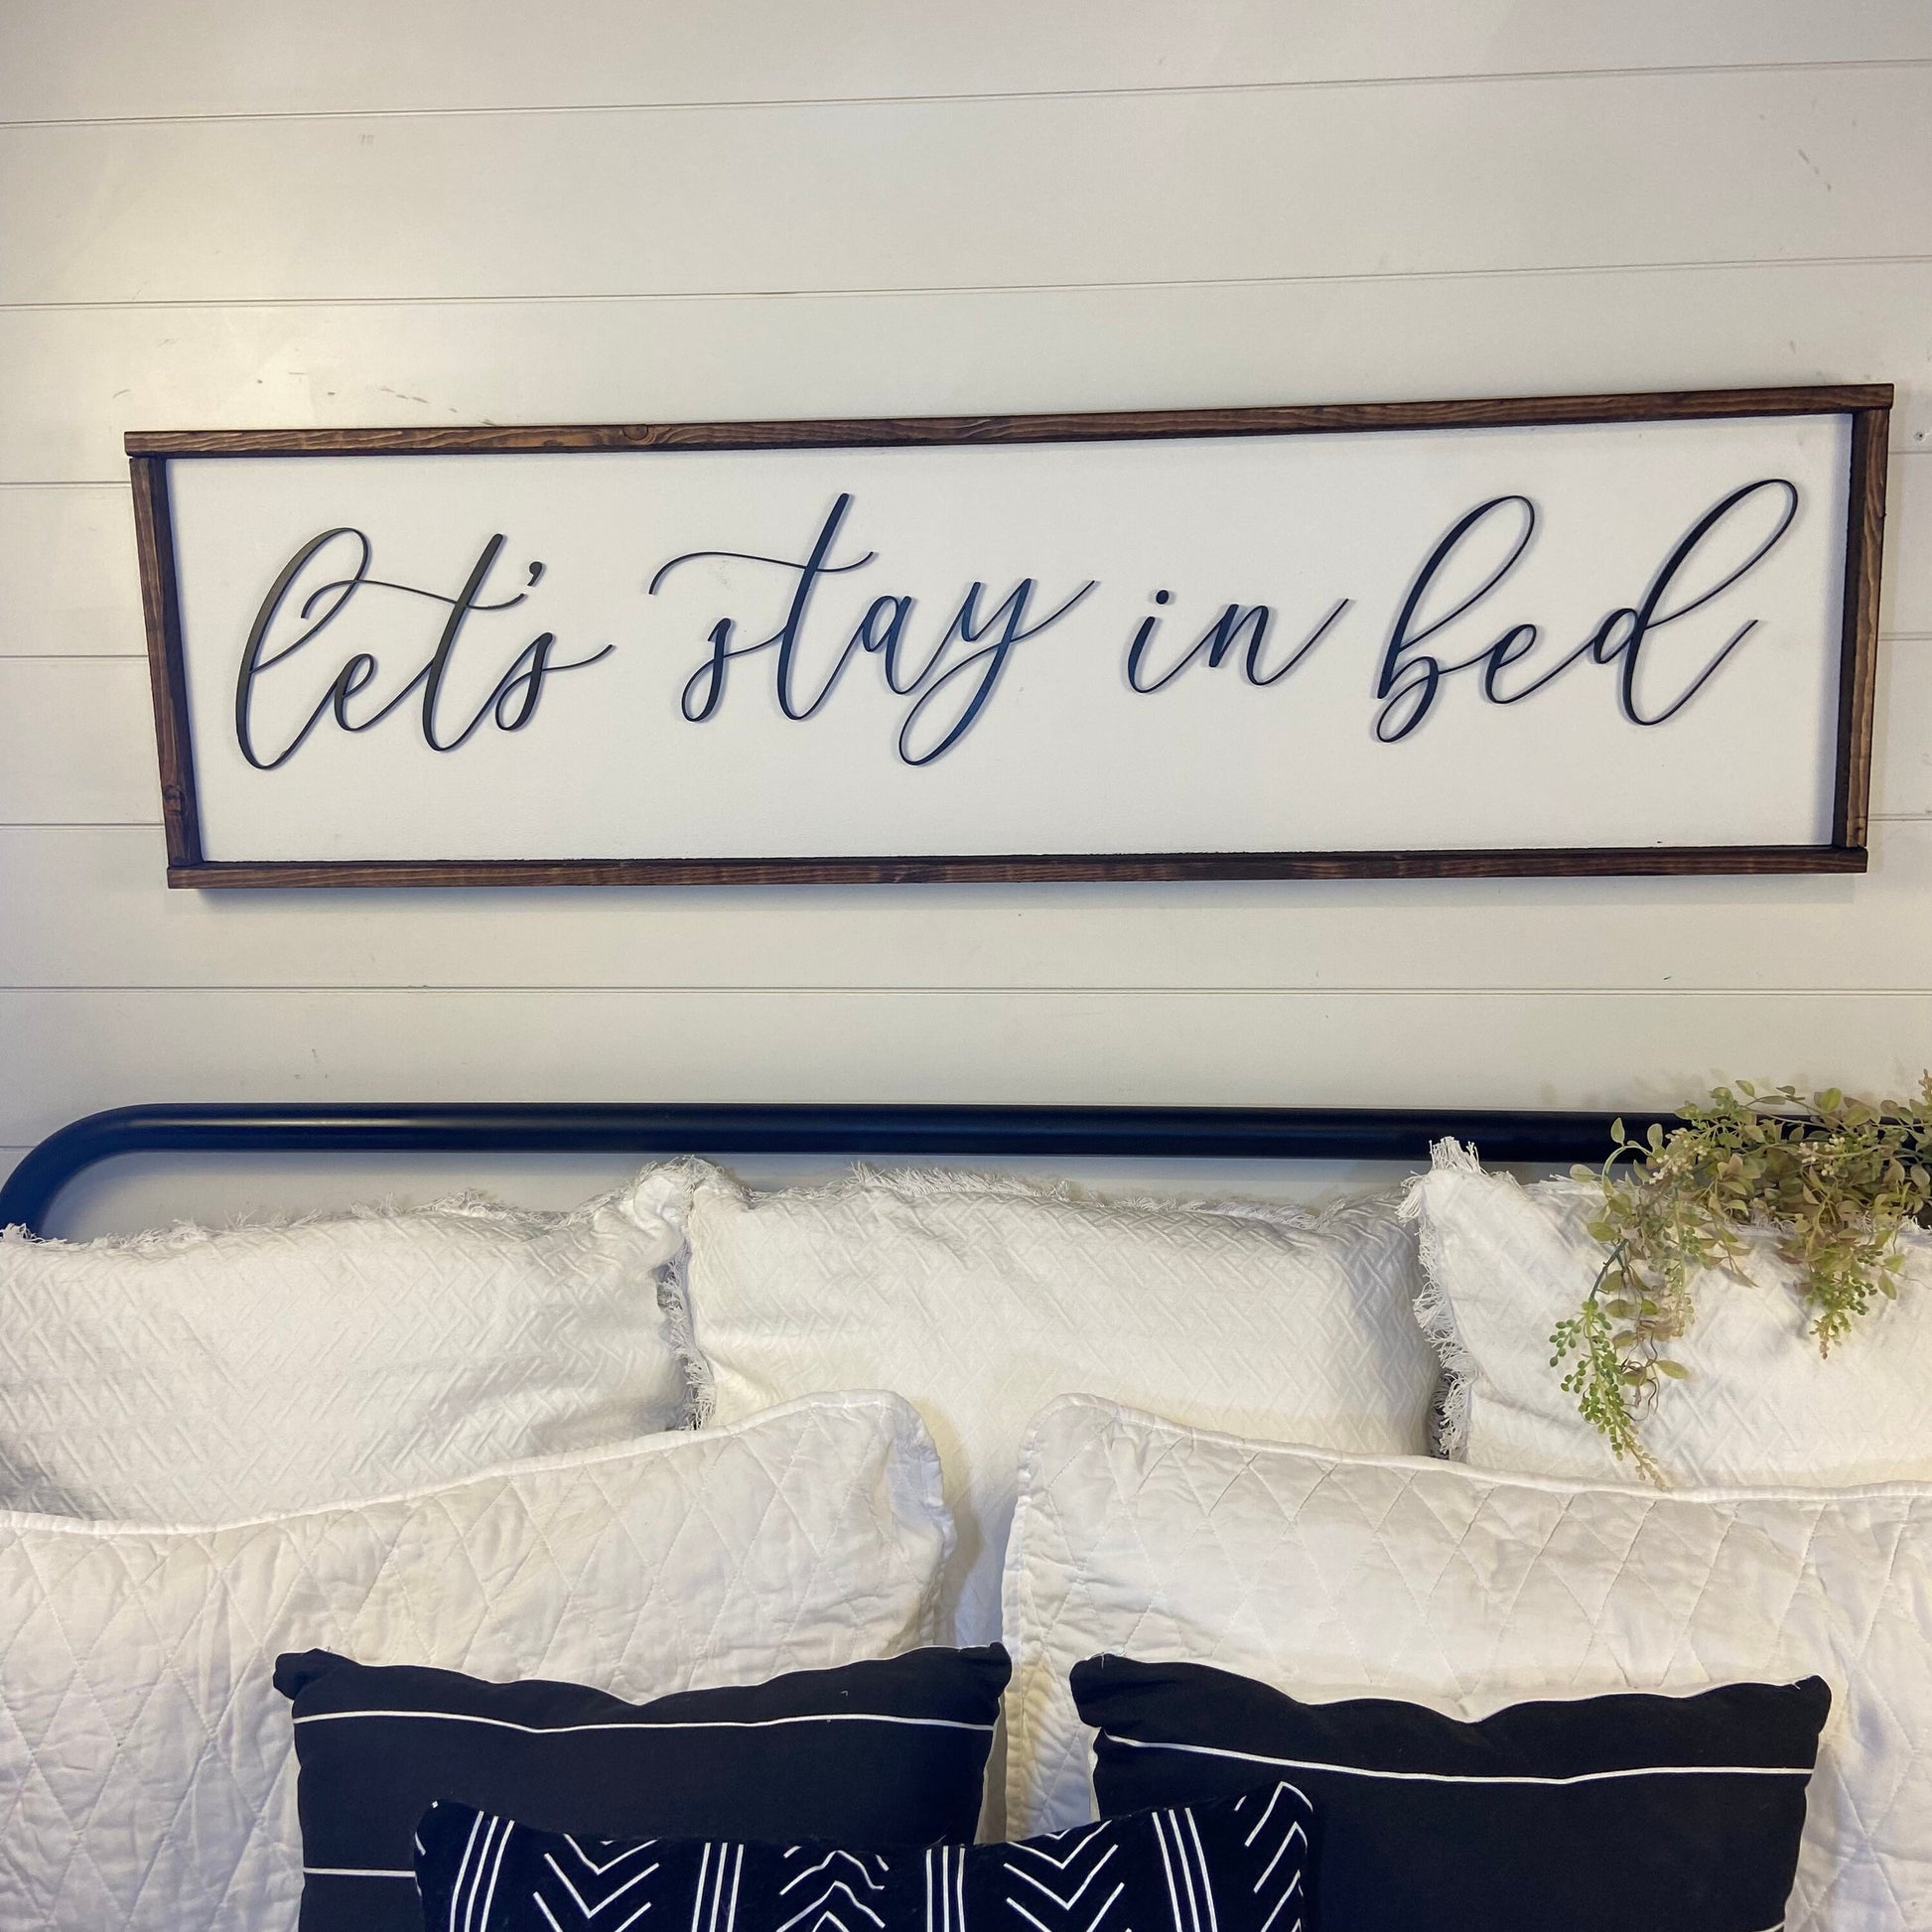 let’s stay in bed - above over the bed sign - master bedroom wall art [FREE SHIPPING!]